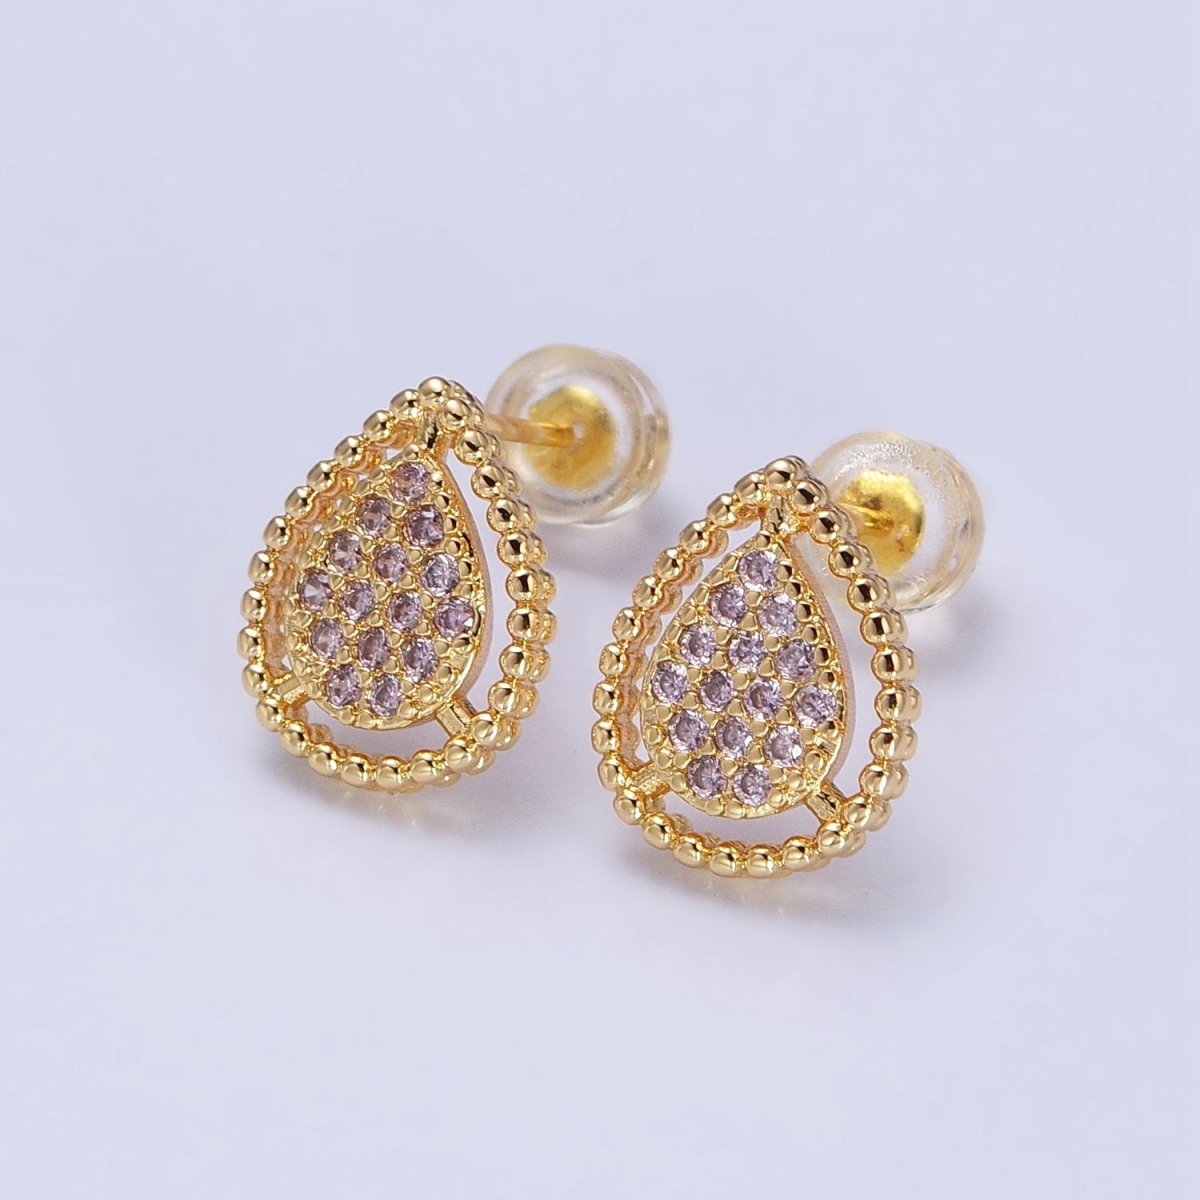 Gold, Silver Beaded Clear, Green, Pink Micro Paved Teardrop CZ Stud Earrings | AB477 AB753 AB754 AB773 - AB775 - DLUXCA